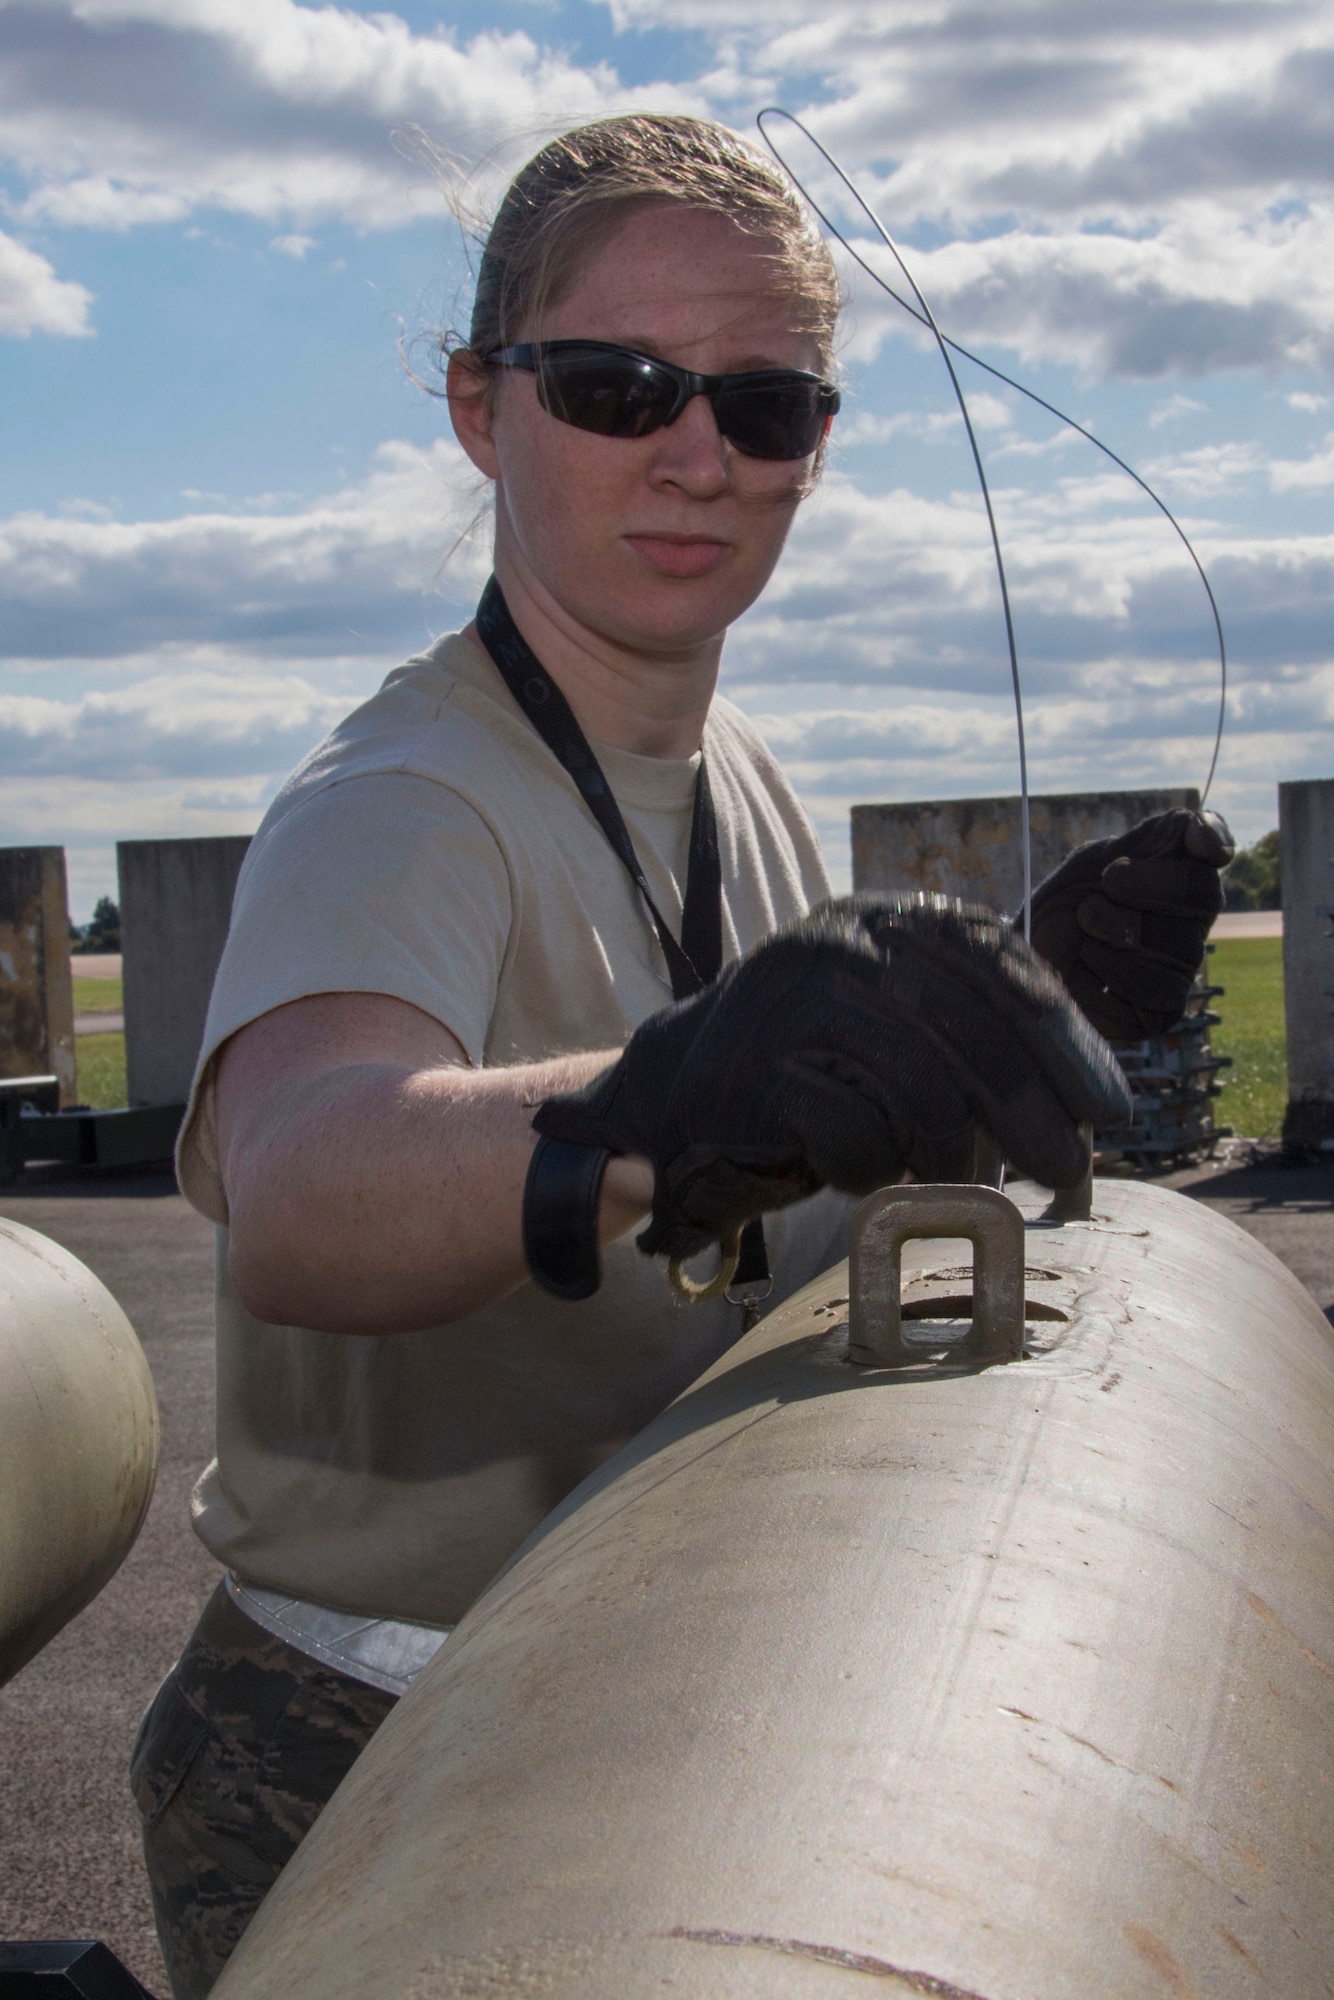 U.S. Air Force Staff Sgt. Ashley Johnson, a munitions technician assigned to the 707th Maintenance Squadron, performs maintenance on a munition during Ample Strike 18 at Royal Air Force Fairford, England, Sept. 7, 2018.   When not building munitions, Johnson can be found practicing her love of art. (U.S. Air Force photo by Master Sgt. Ted Daigle)